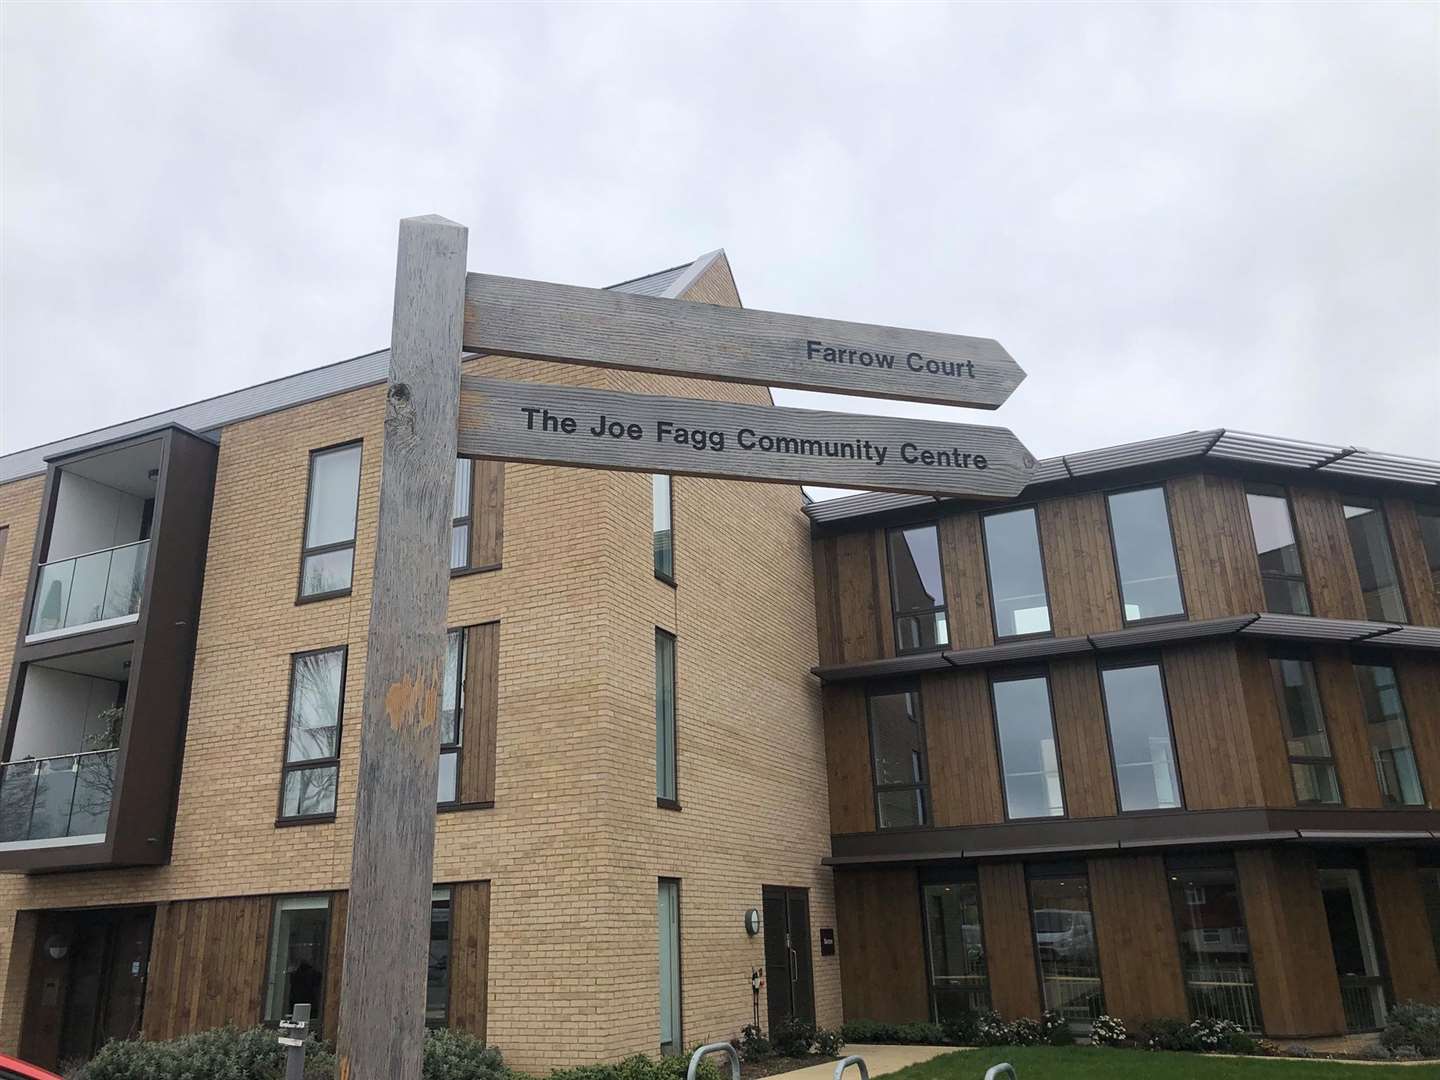 New signage at the Farrow Court site